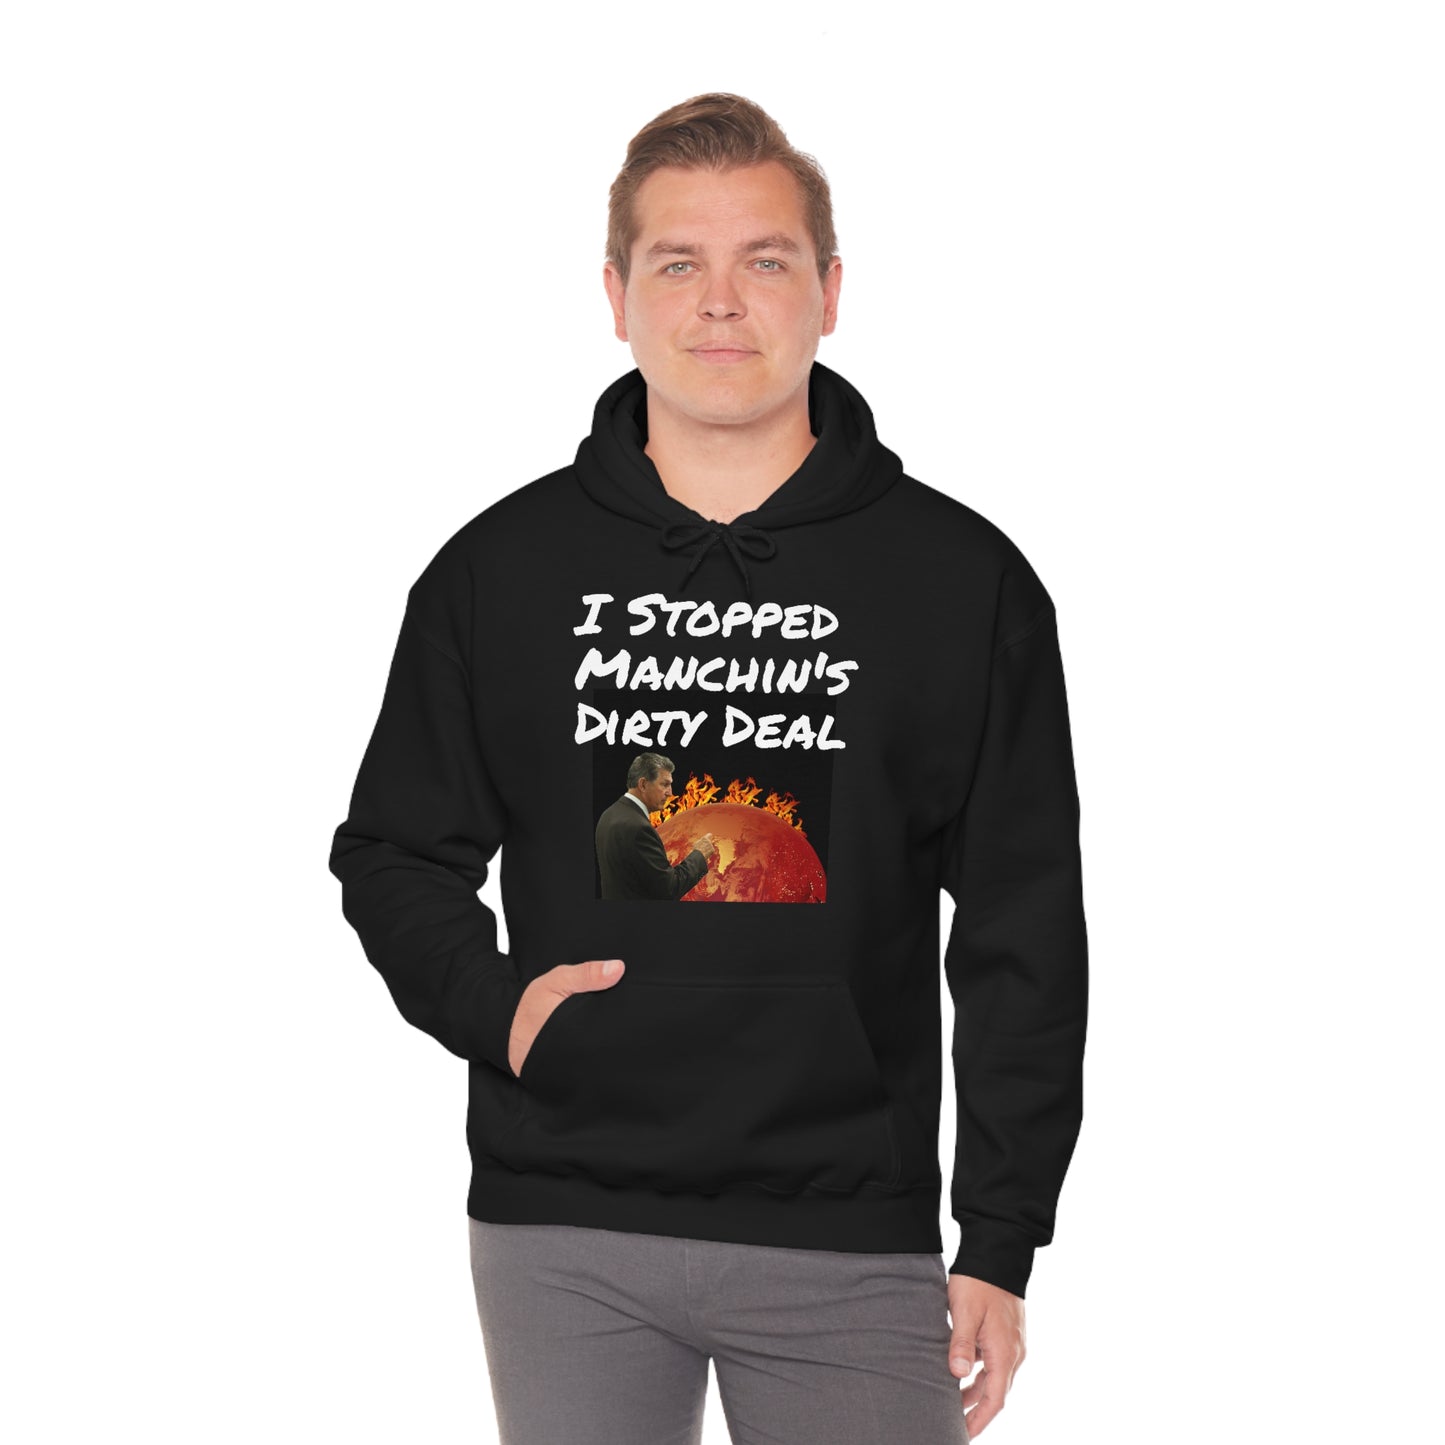 I stopped Manchin's dirty deal hooded sweatshirt